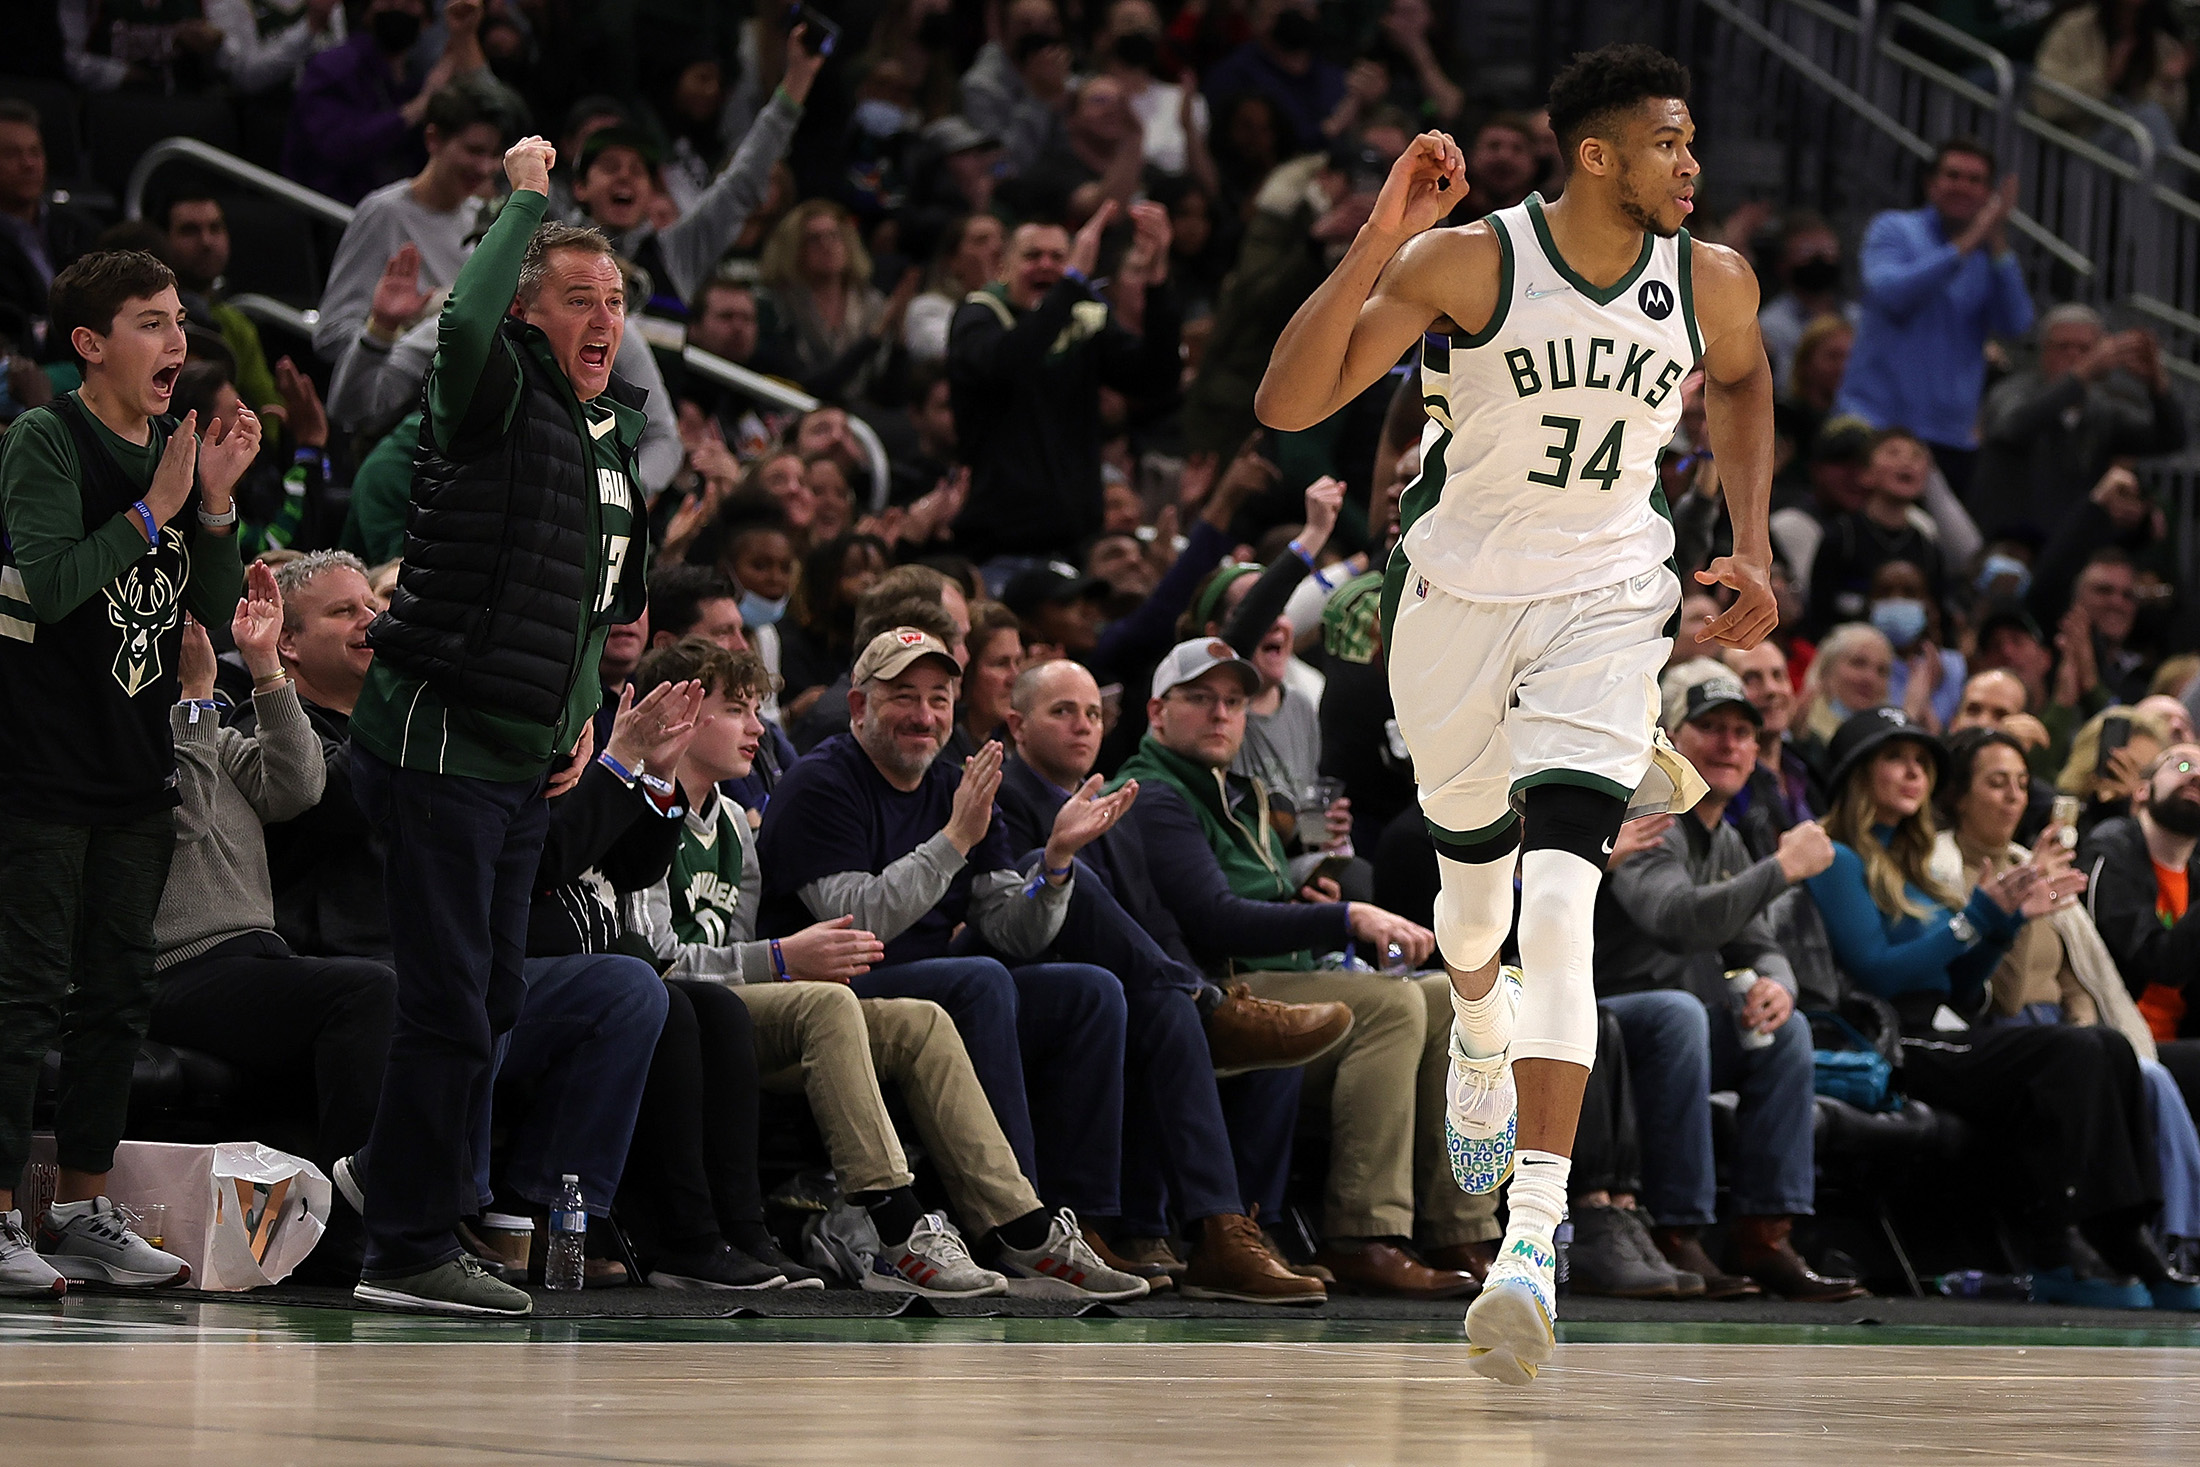 Here's What Fans Want From Giannis Antetokounmpo's First Signature